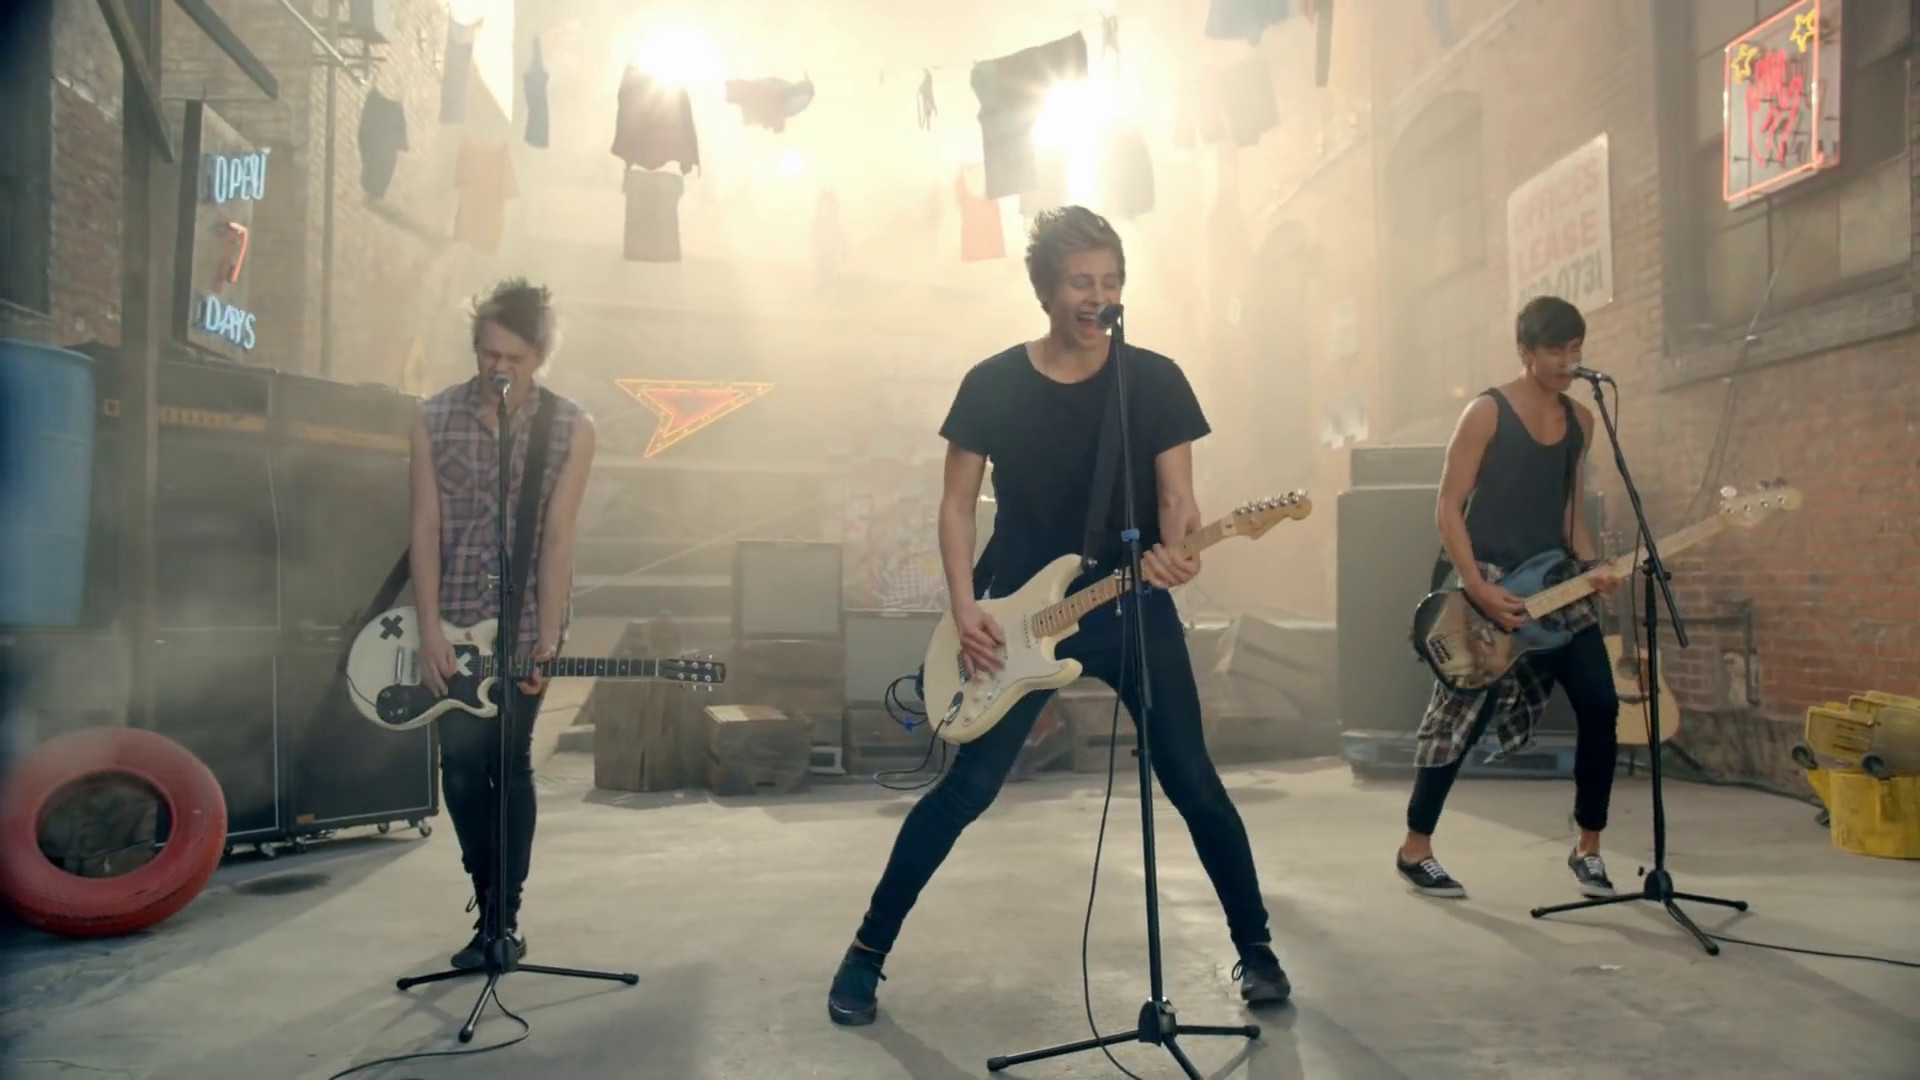 1920x1080 5 Seconds of Summer - She Looks So Perfect - 5 Seconds of Summer Wiki  (20).png